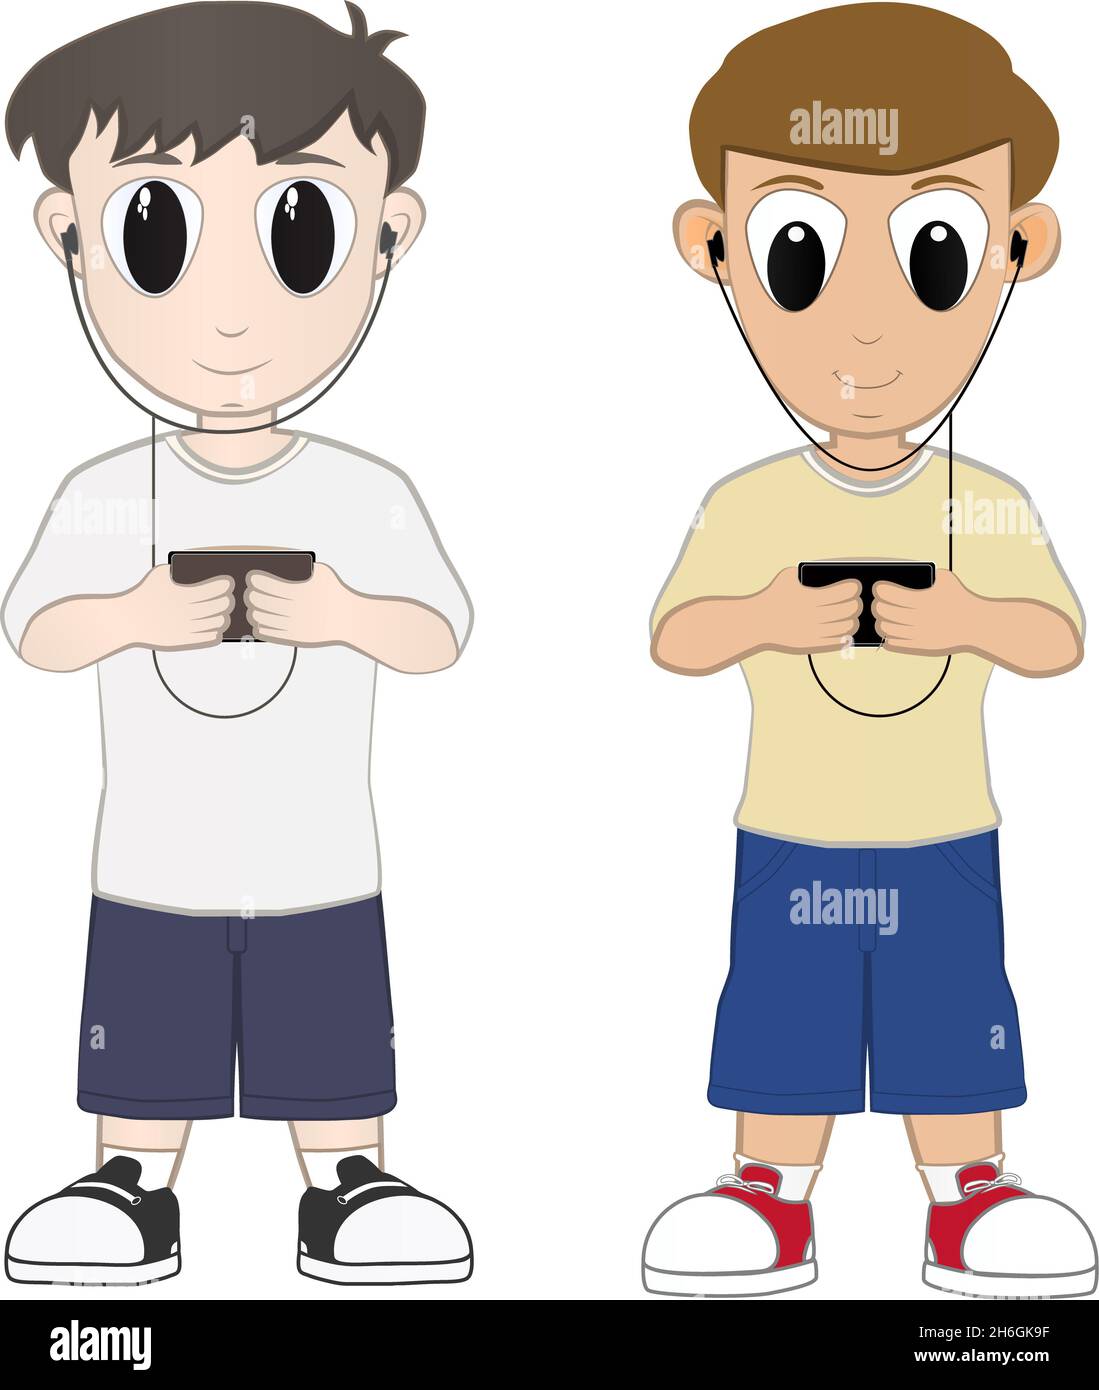 Cartoons of the boys and their gadgets Stock Photo